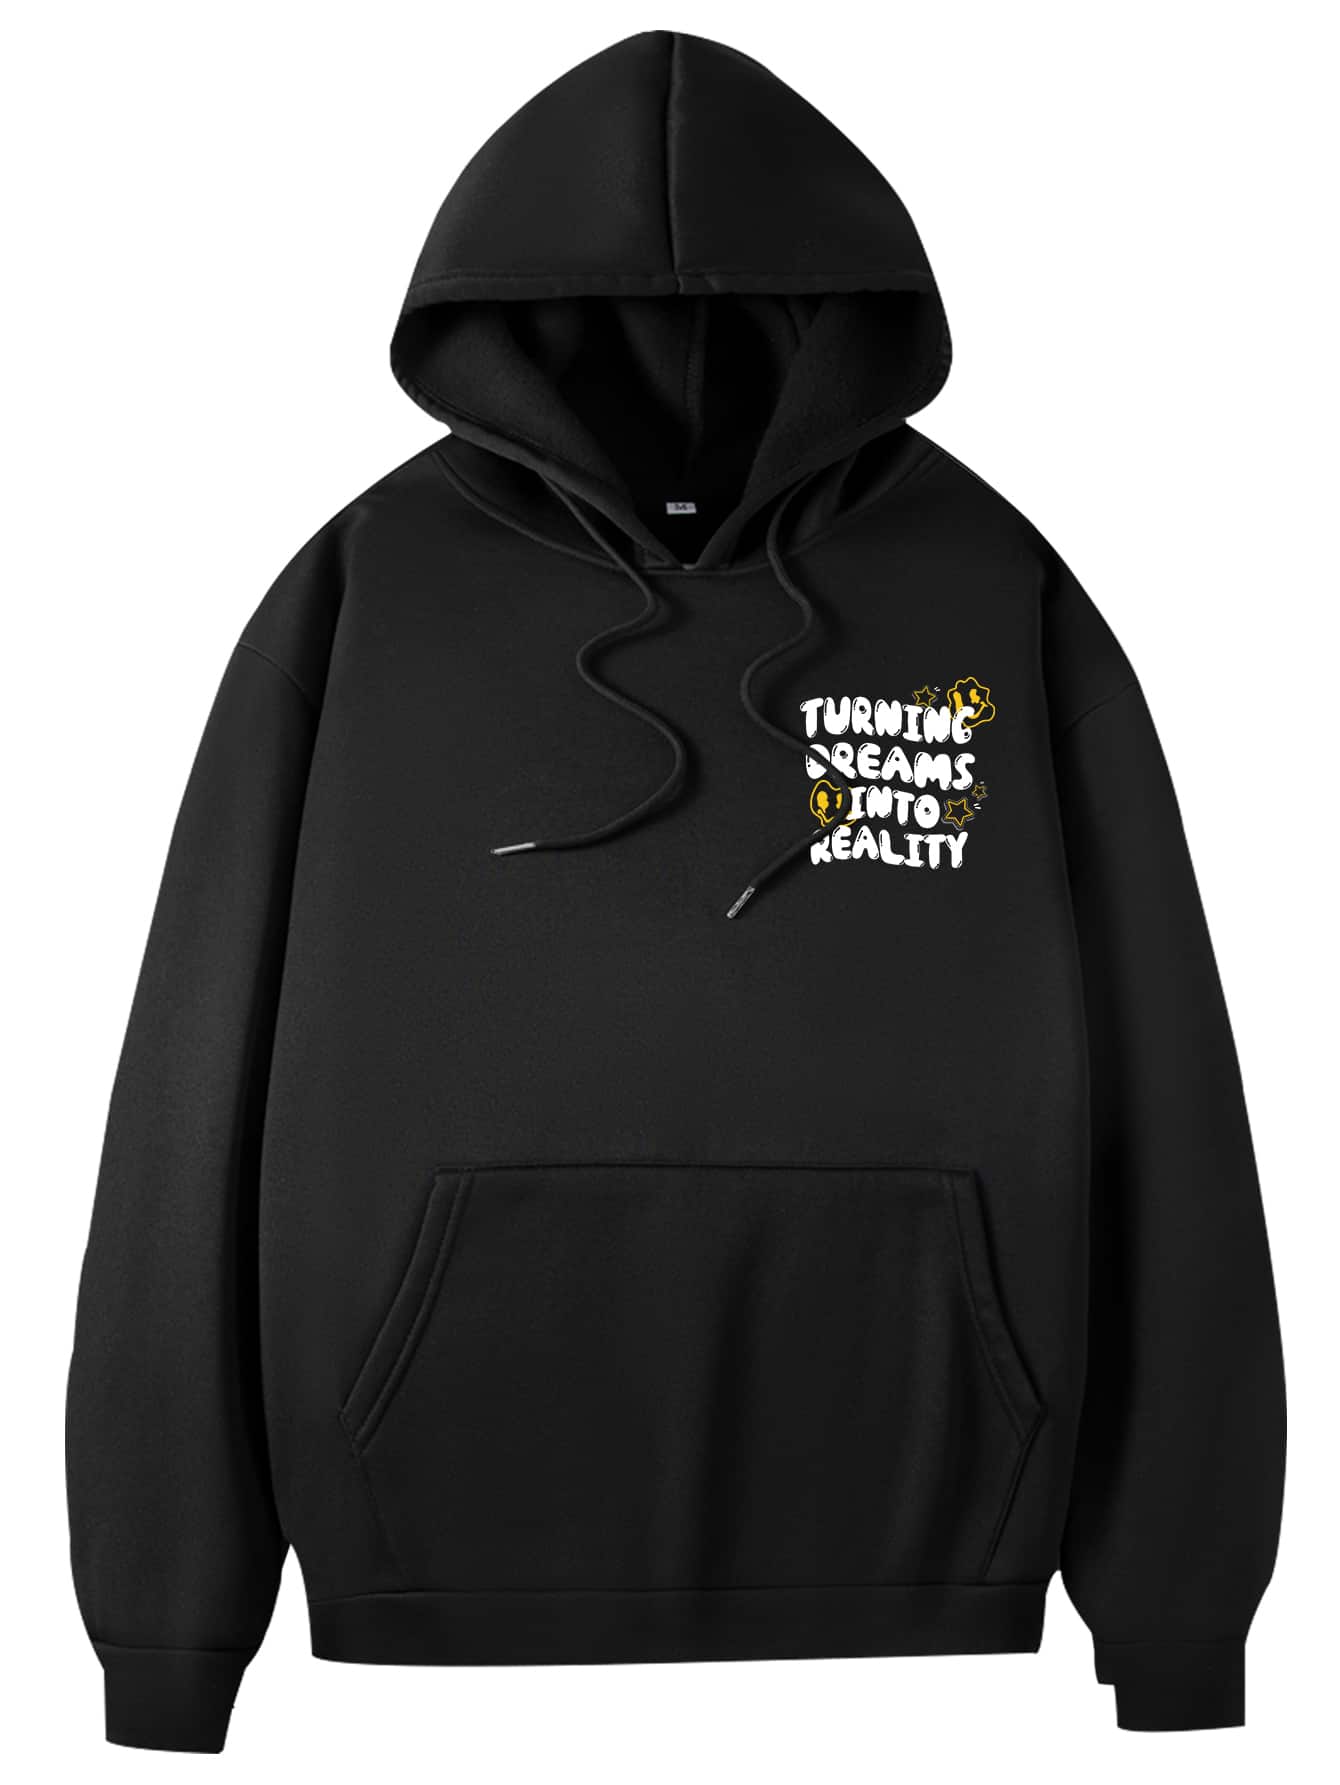 Turning Dreams into Reality Hoodie